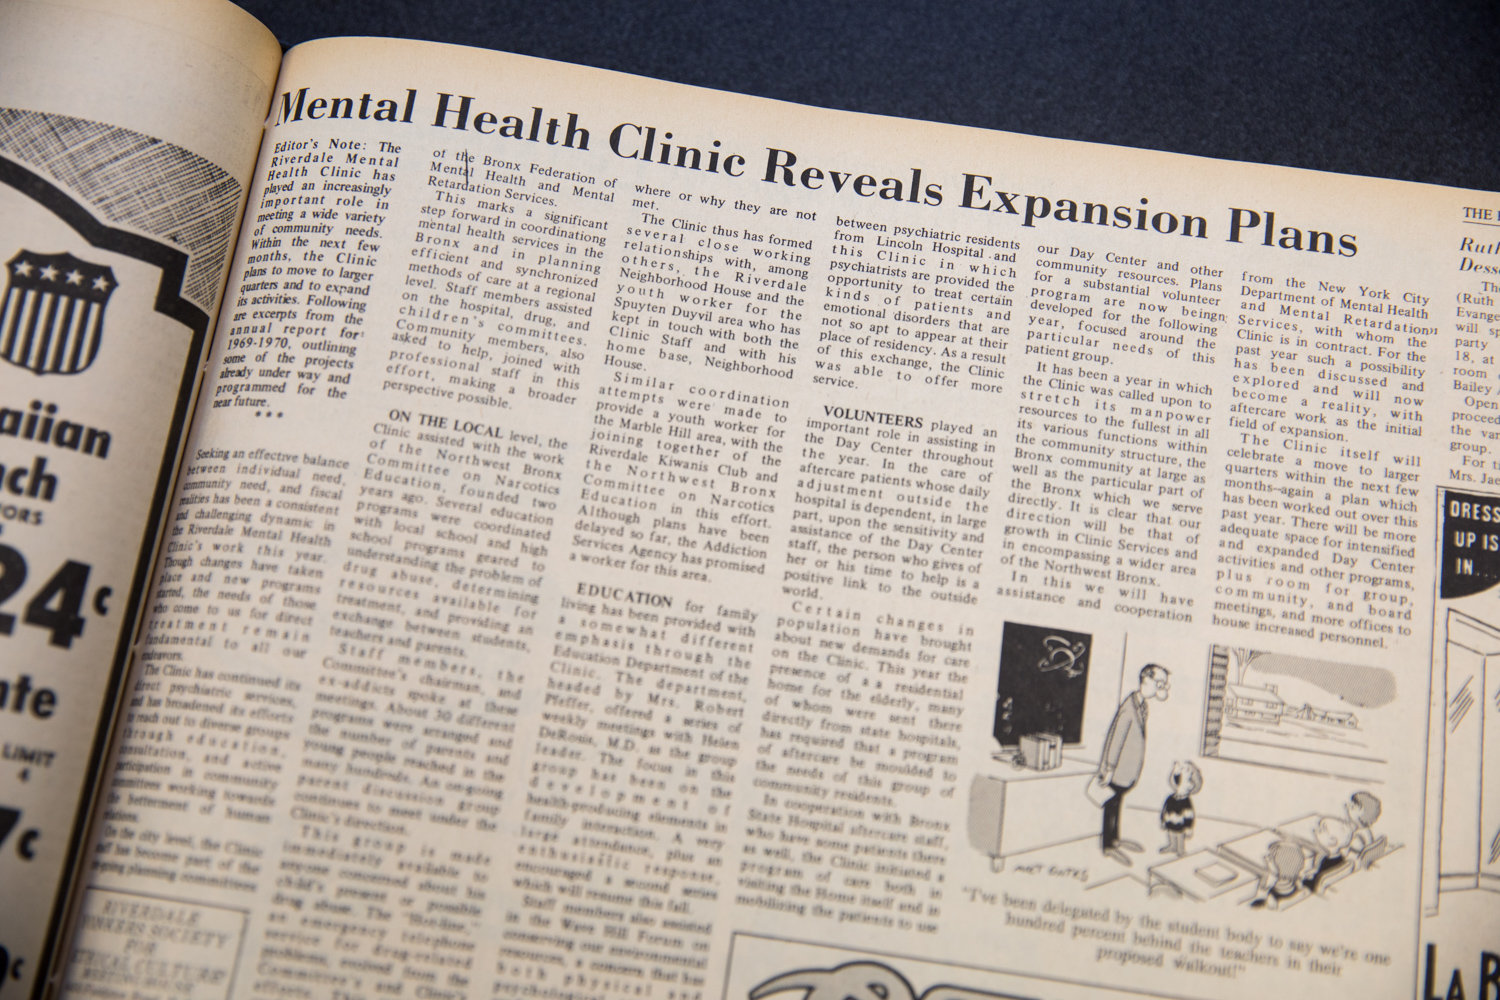 The Nov. 12, 1970, edition of The Riverdale Press detailed the Riverdale Mental Health Association’s plans for expansion. The clinic opened its doors 10 years earlier.